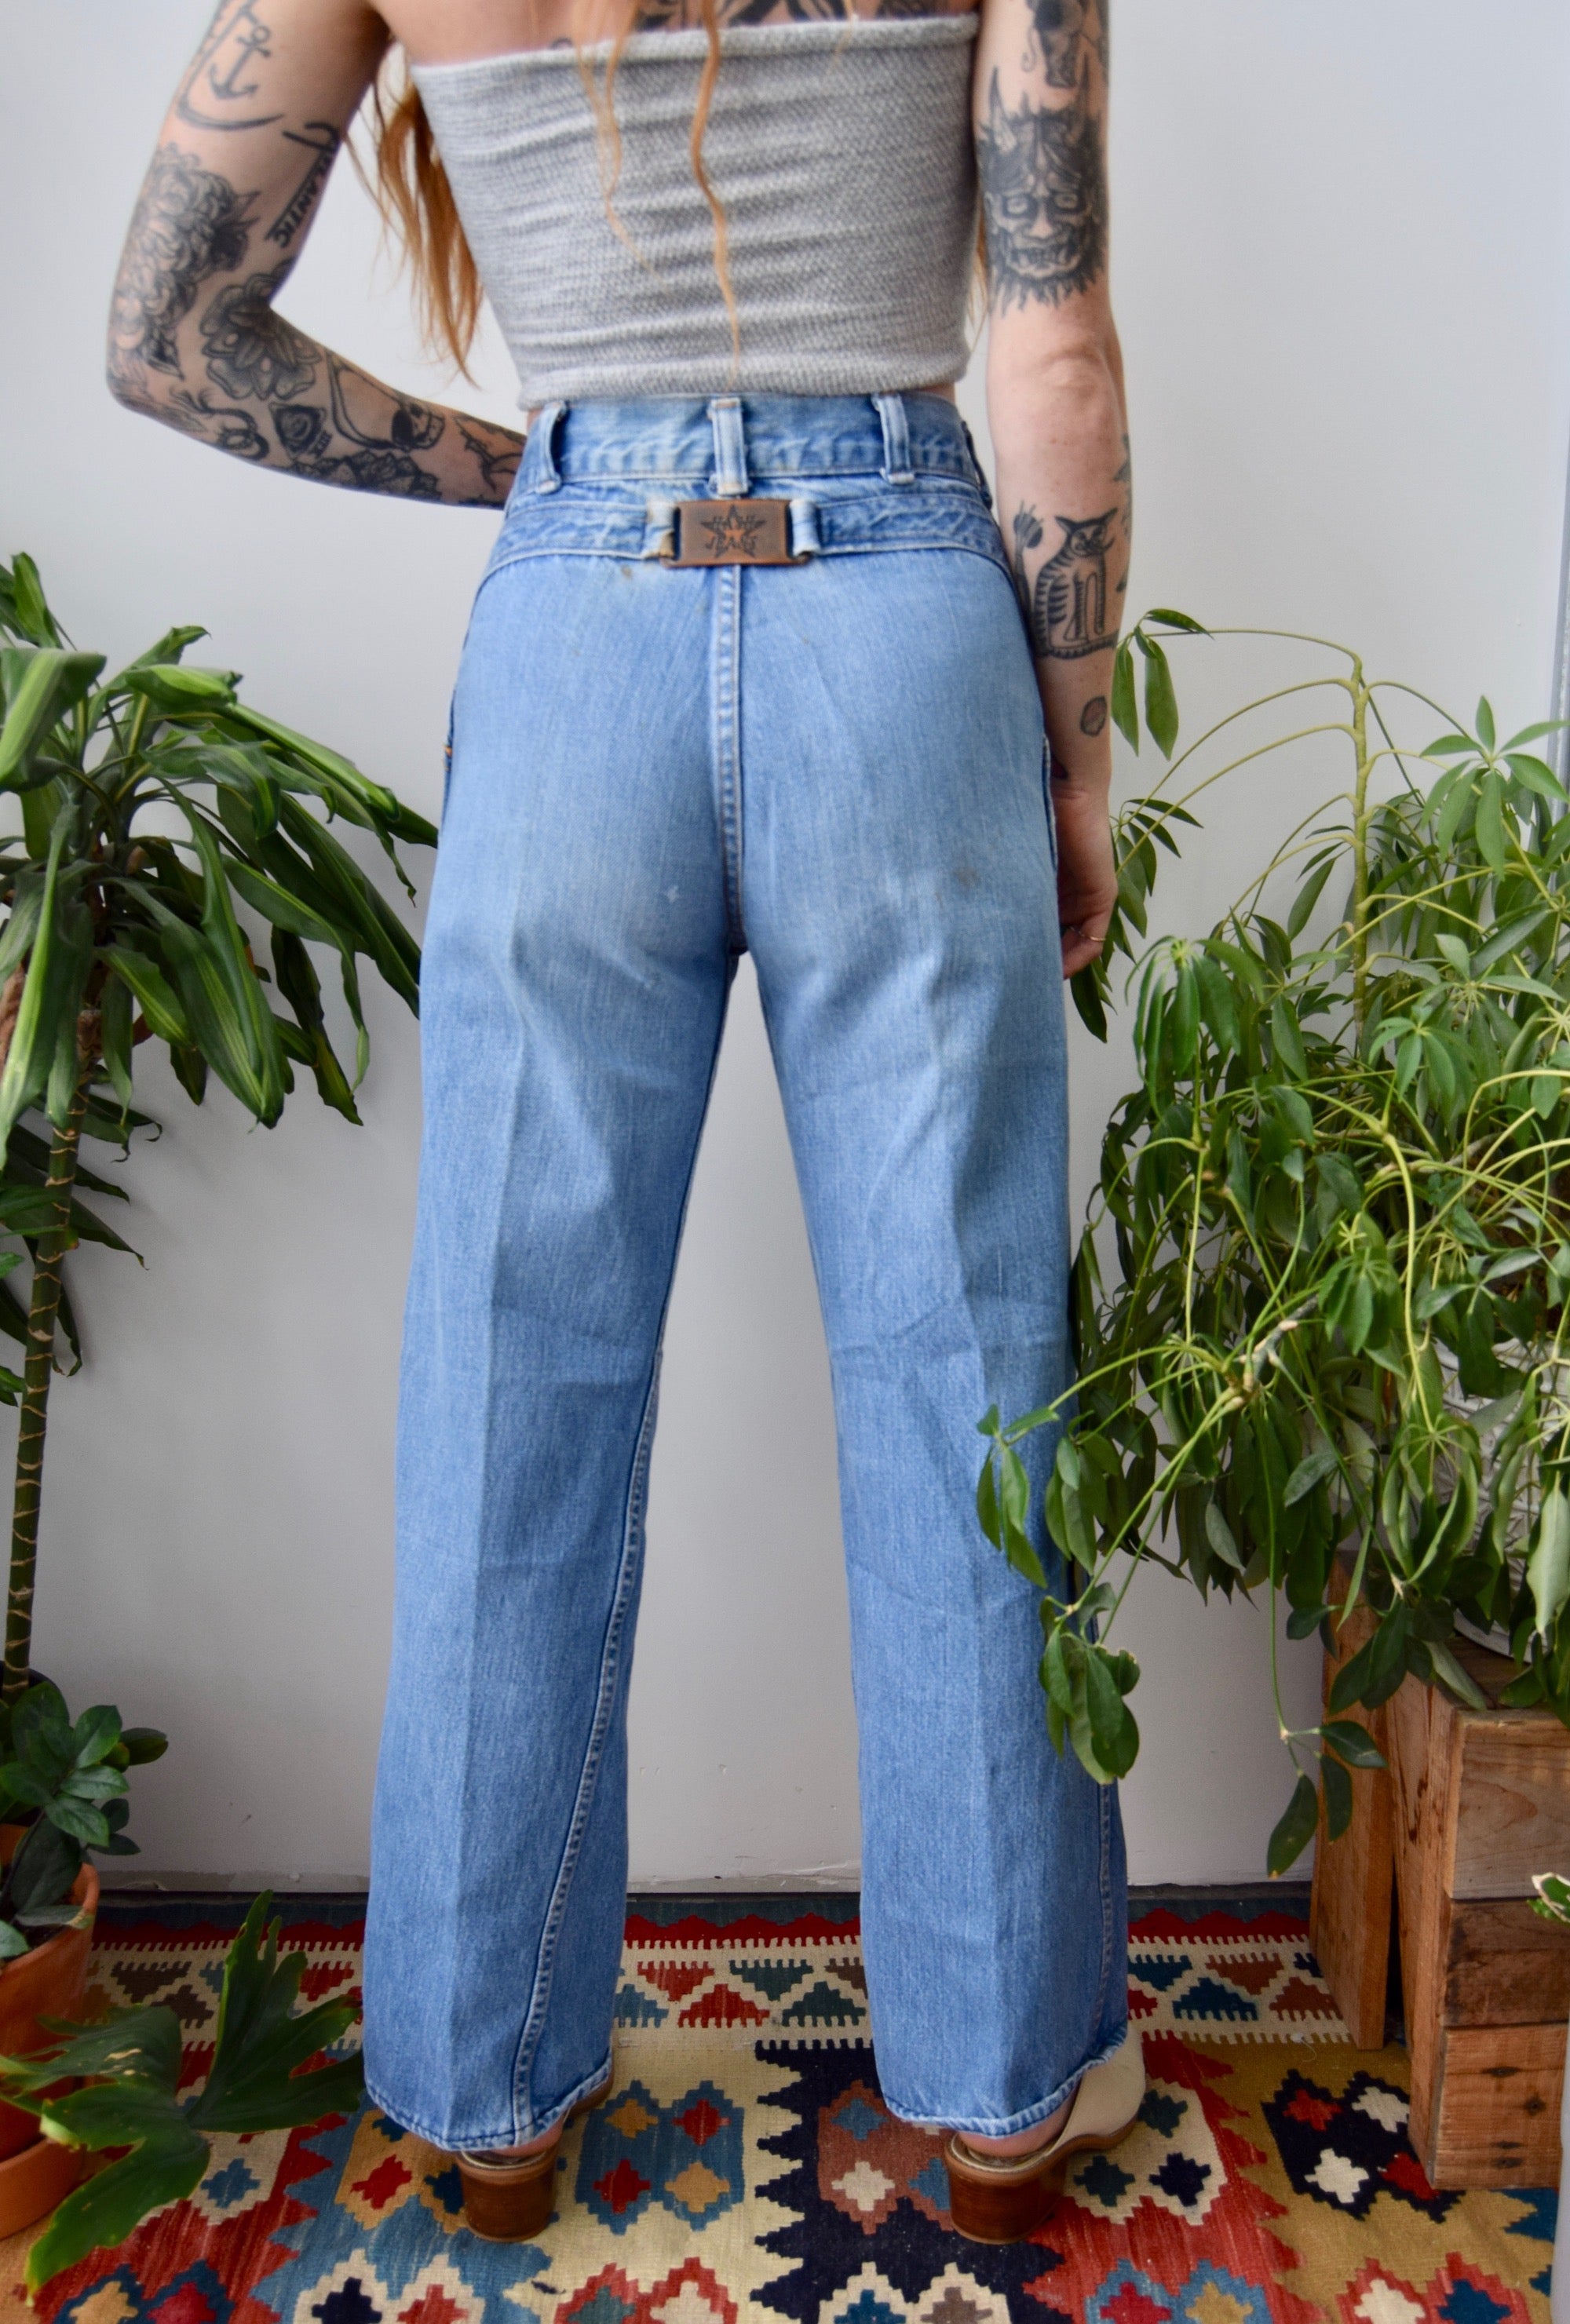 "HASH" Buckle Jeans